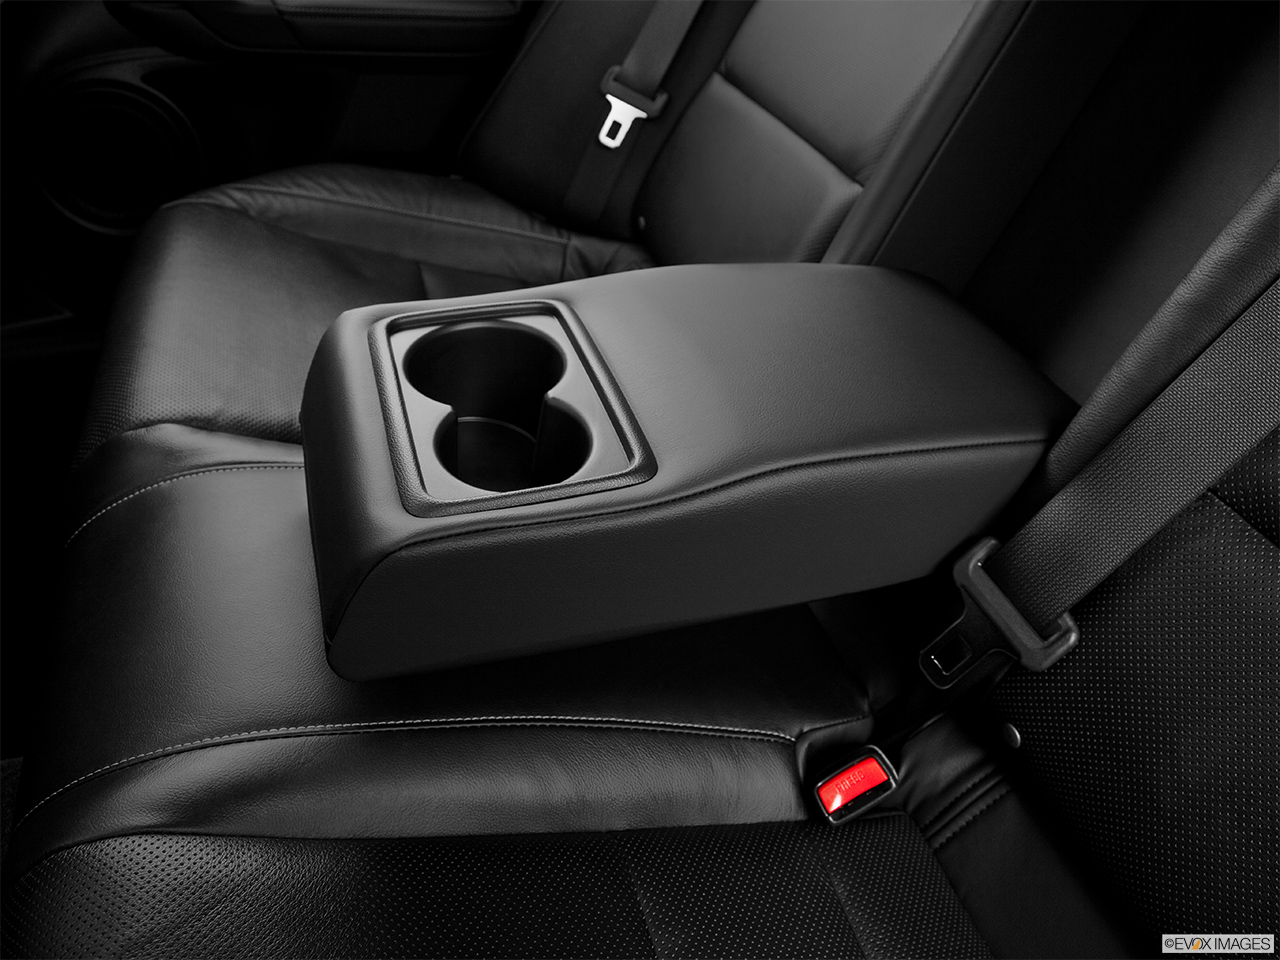 2014 Acura TSX 5-speed Automatic Rear center console with closed lid from driver's side looking down. 